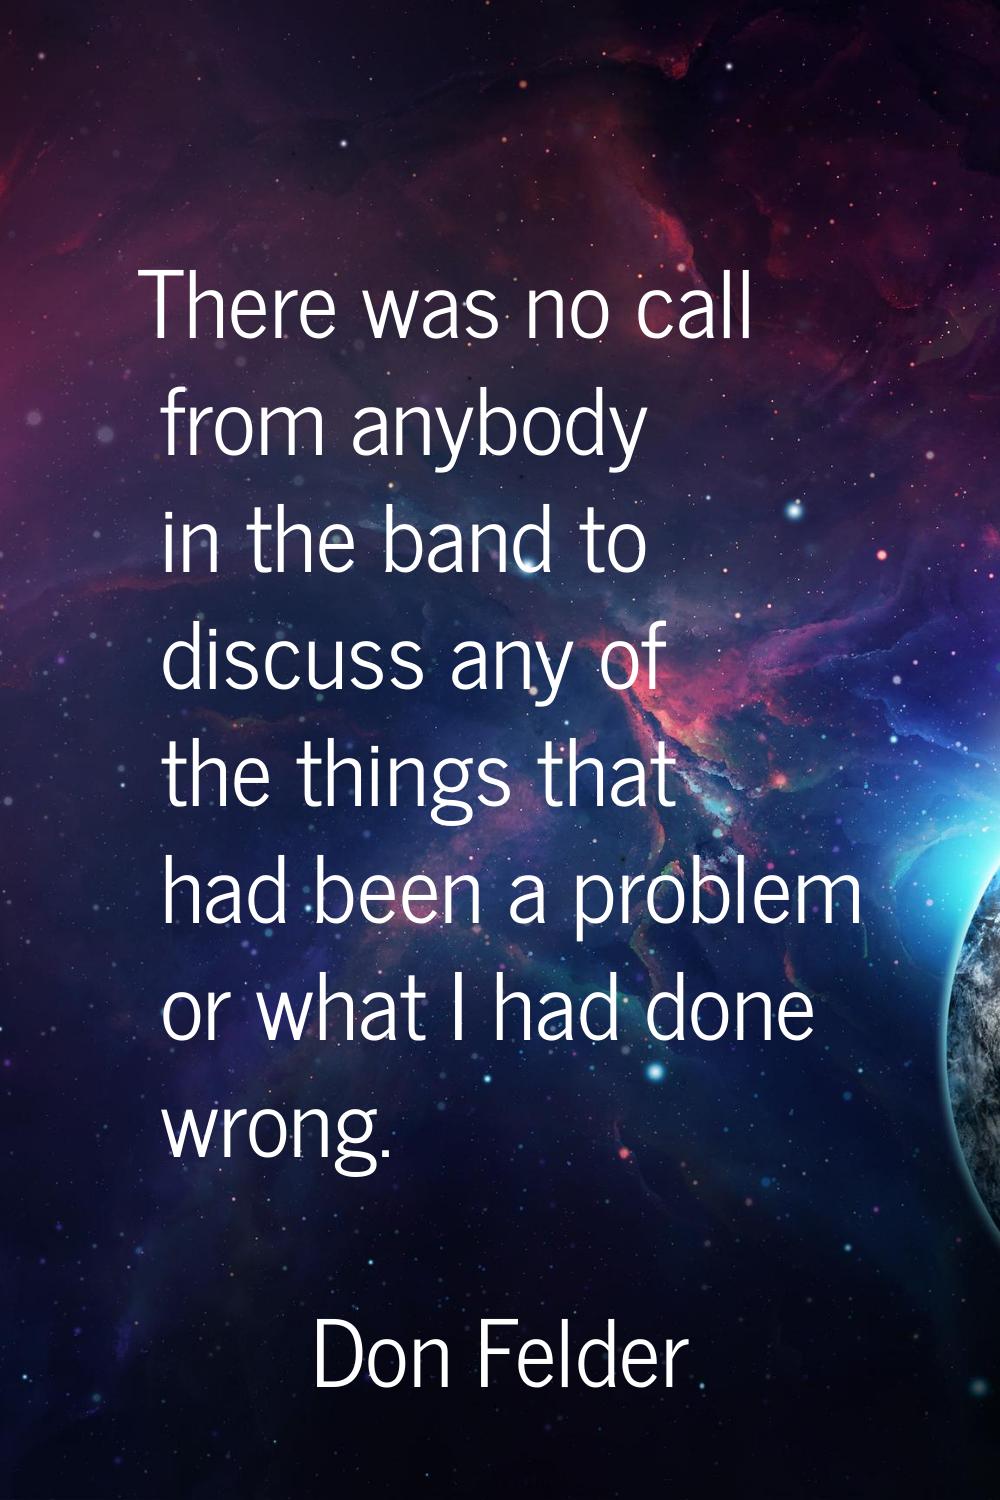 There was no call from anybody in the band to discuss any of the things that had been a problem or 